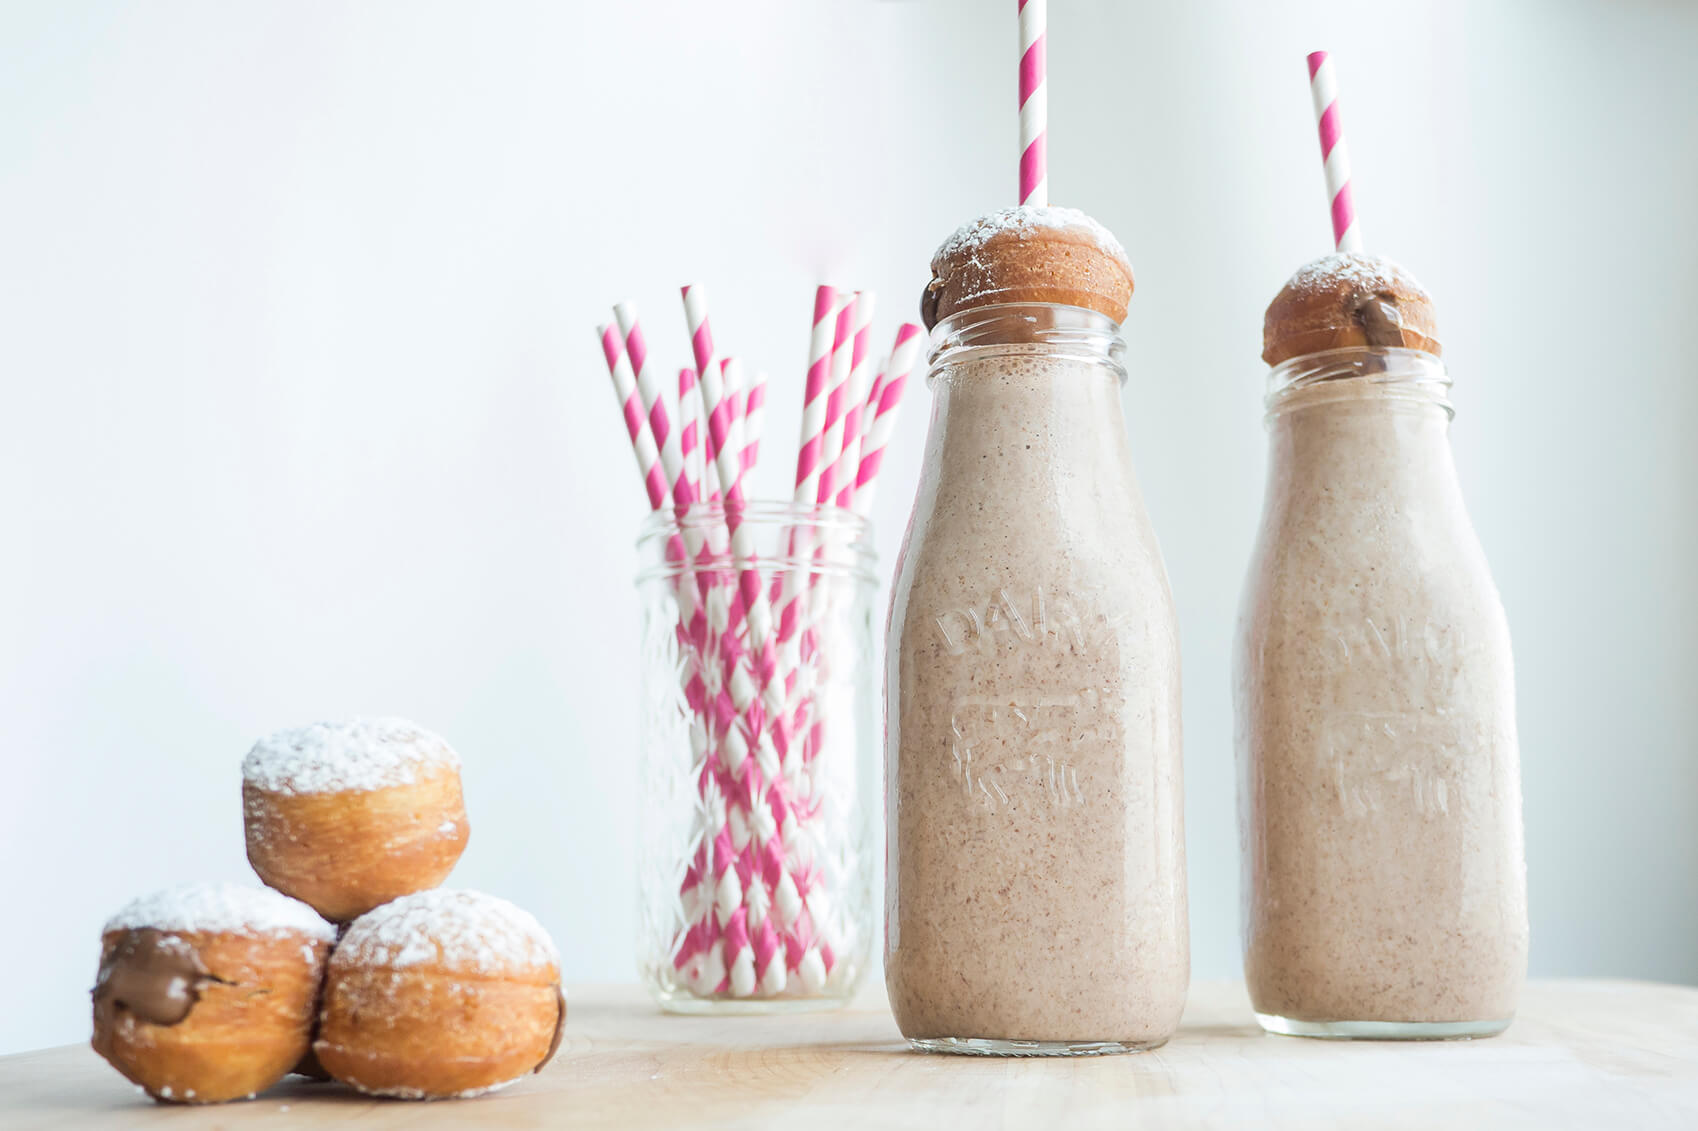 Talk about indulgent! These Nutella doughnut hole milkshakes pair perfectly with a burger and fries.